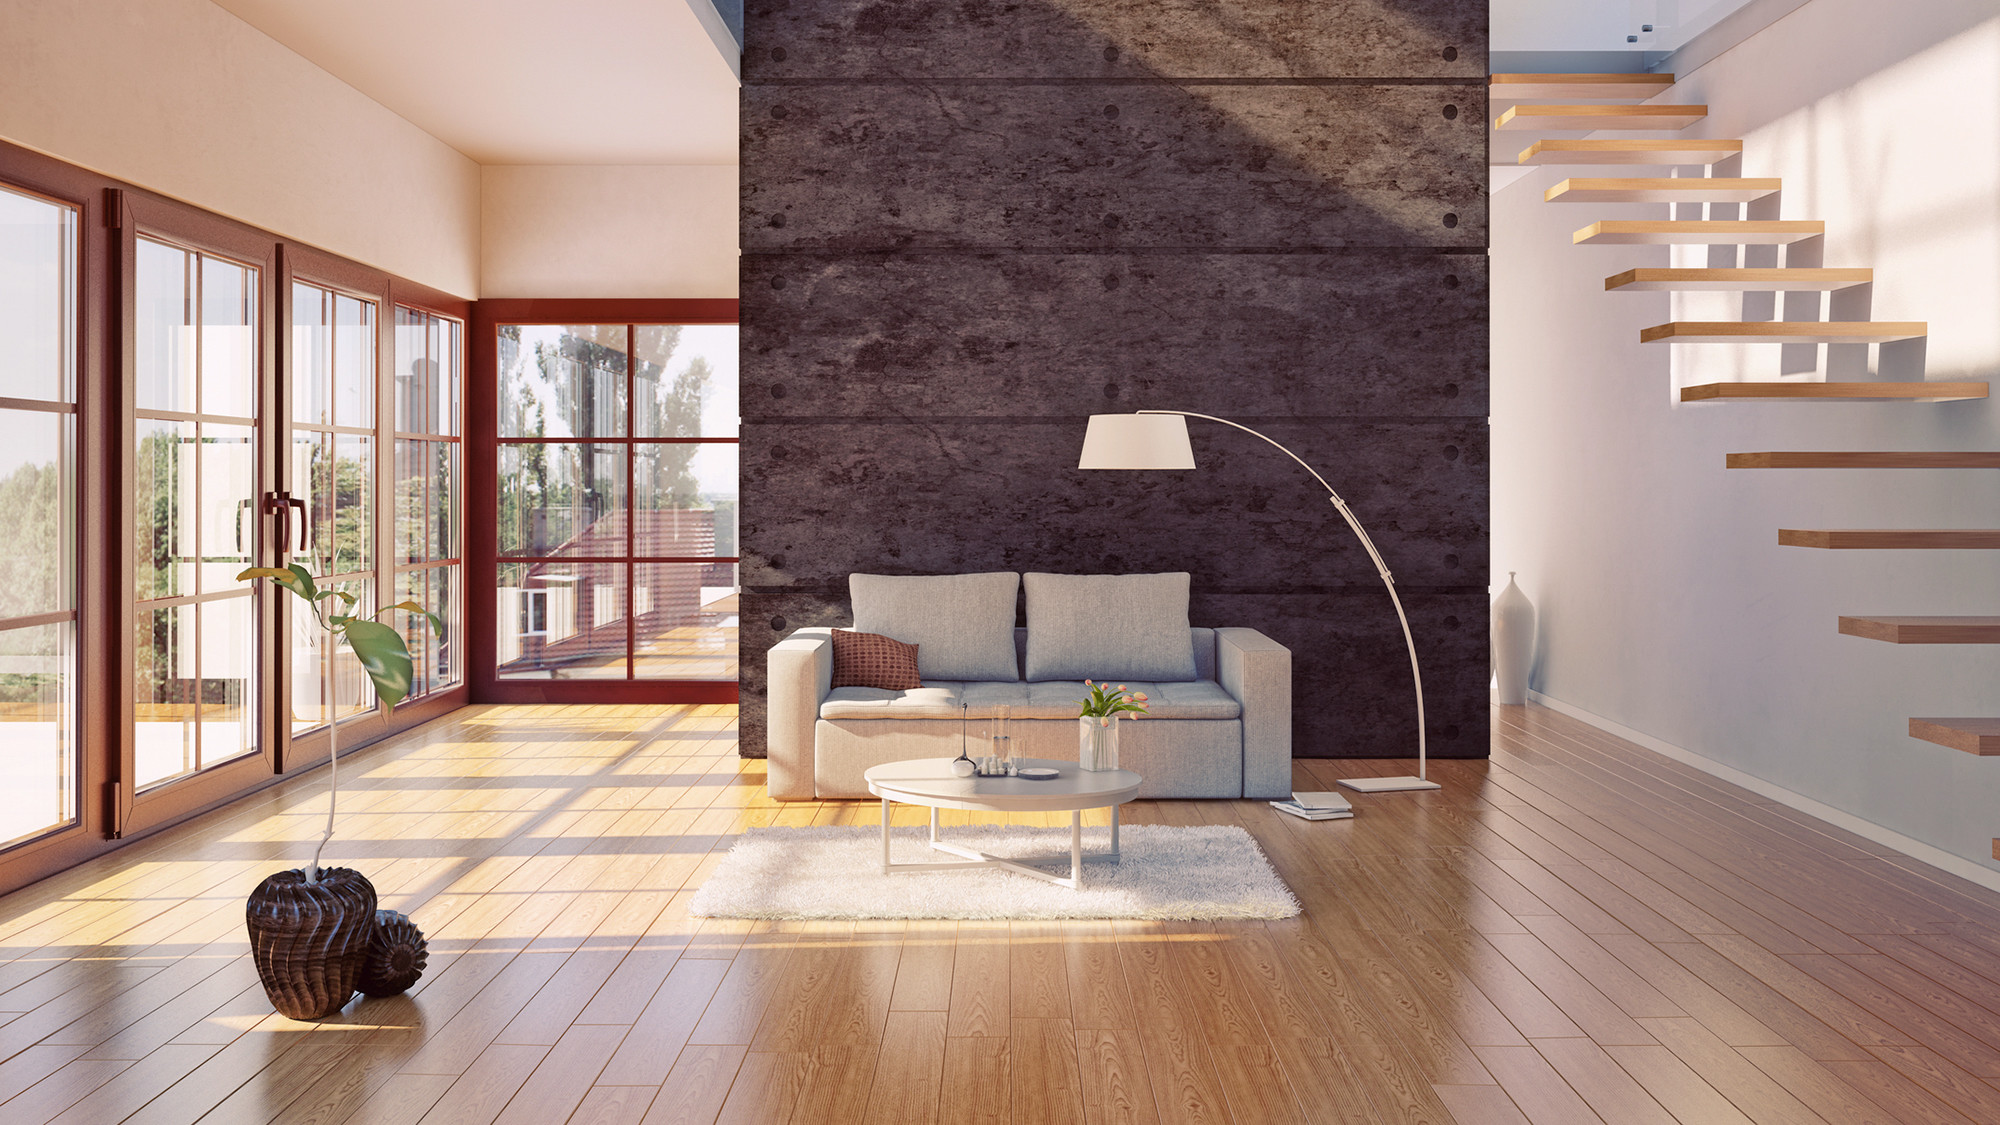 11 Stylish Hardwood Floor Cleaning Companies Near Me 2023 free download hardwood floor cleaning companies near me of do hardwood floors provide the best return on investment realtor coma intended for hardwood floors investment